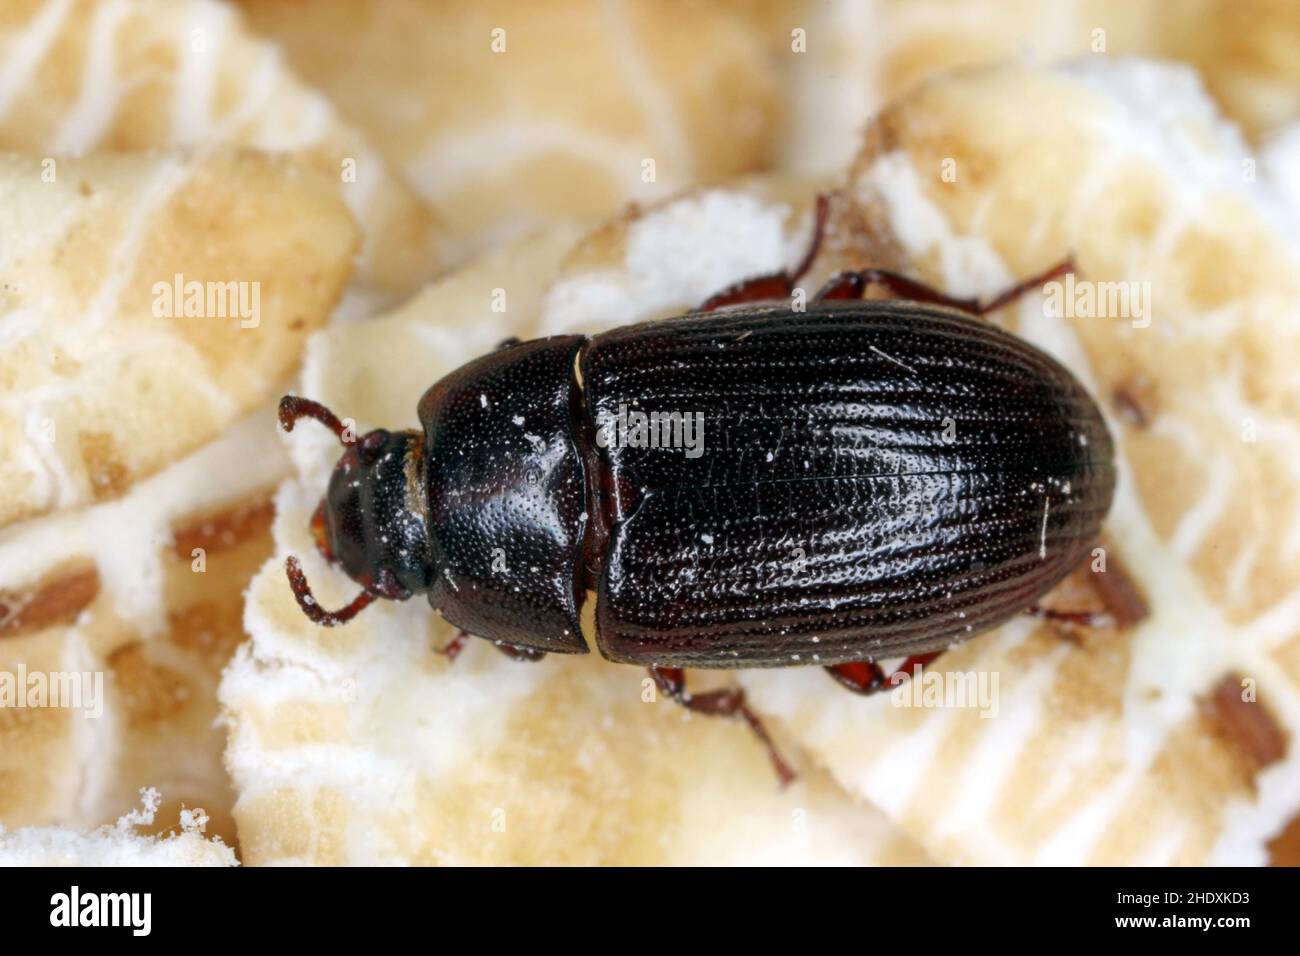 Alphitobius diaperinus is a species of beetle in the family ...